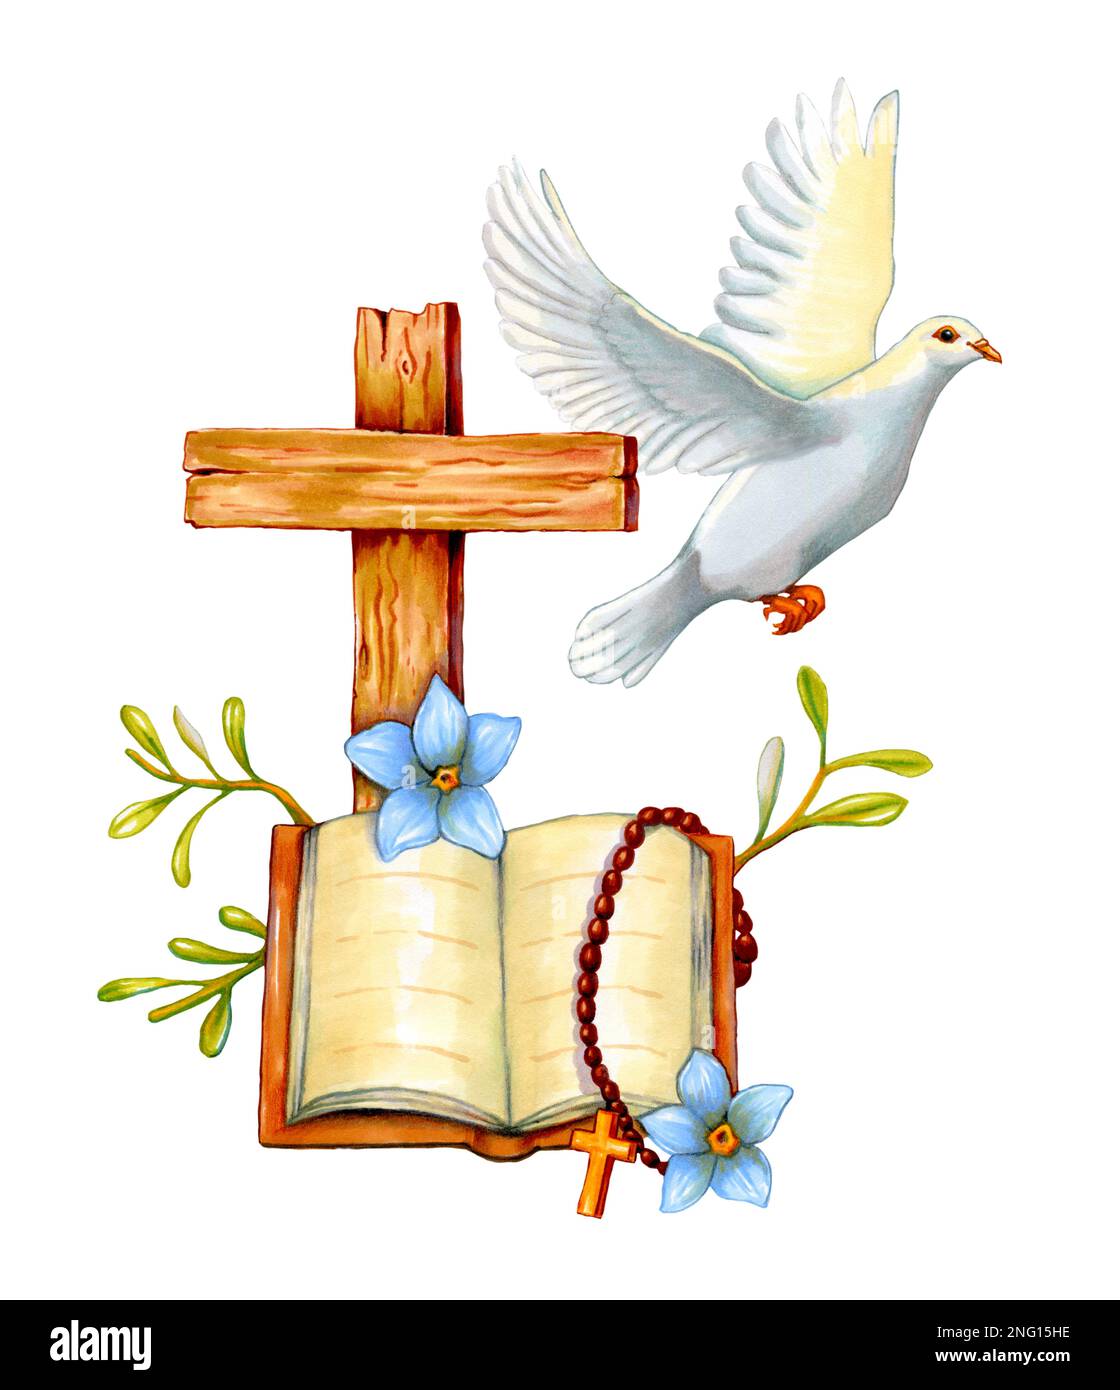 Christian cross with an holy book and a white dove. Traditional illustration on paper. Stock Photo